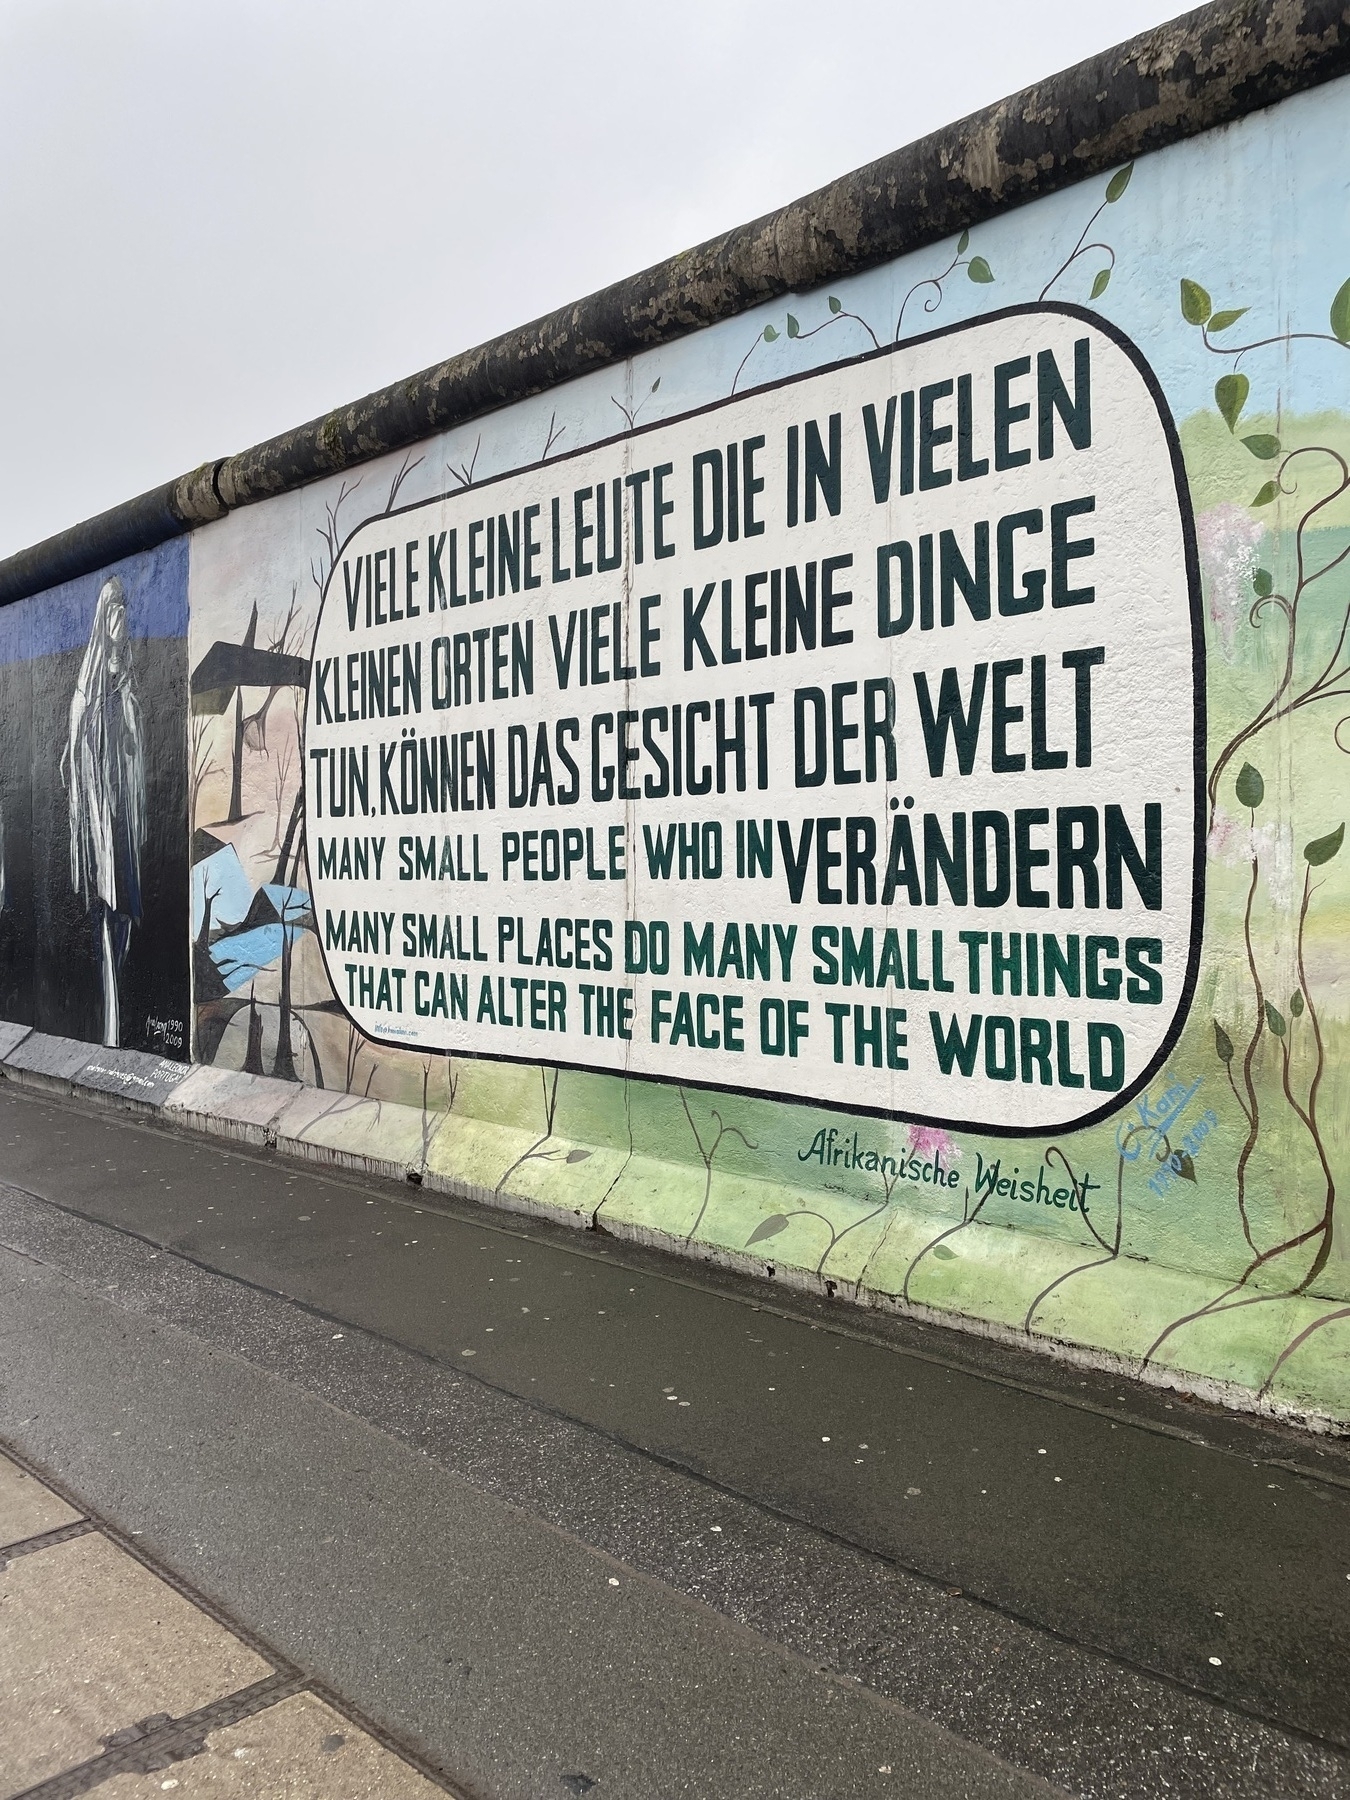 Urban art found on the East Side Gallery with text that reads, first in German: “Viele kleine Leute die in vielen kleinen Orten viele kleine Dinge tun, können das Gesicht der Welt verändern.” and then in English: “Many small people who in many small places do many small things that can alter the face of the world.” underneath the text block is the credits to "Afrikanische Weisheit"—African wisdom in english.